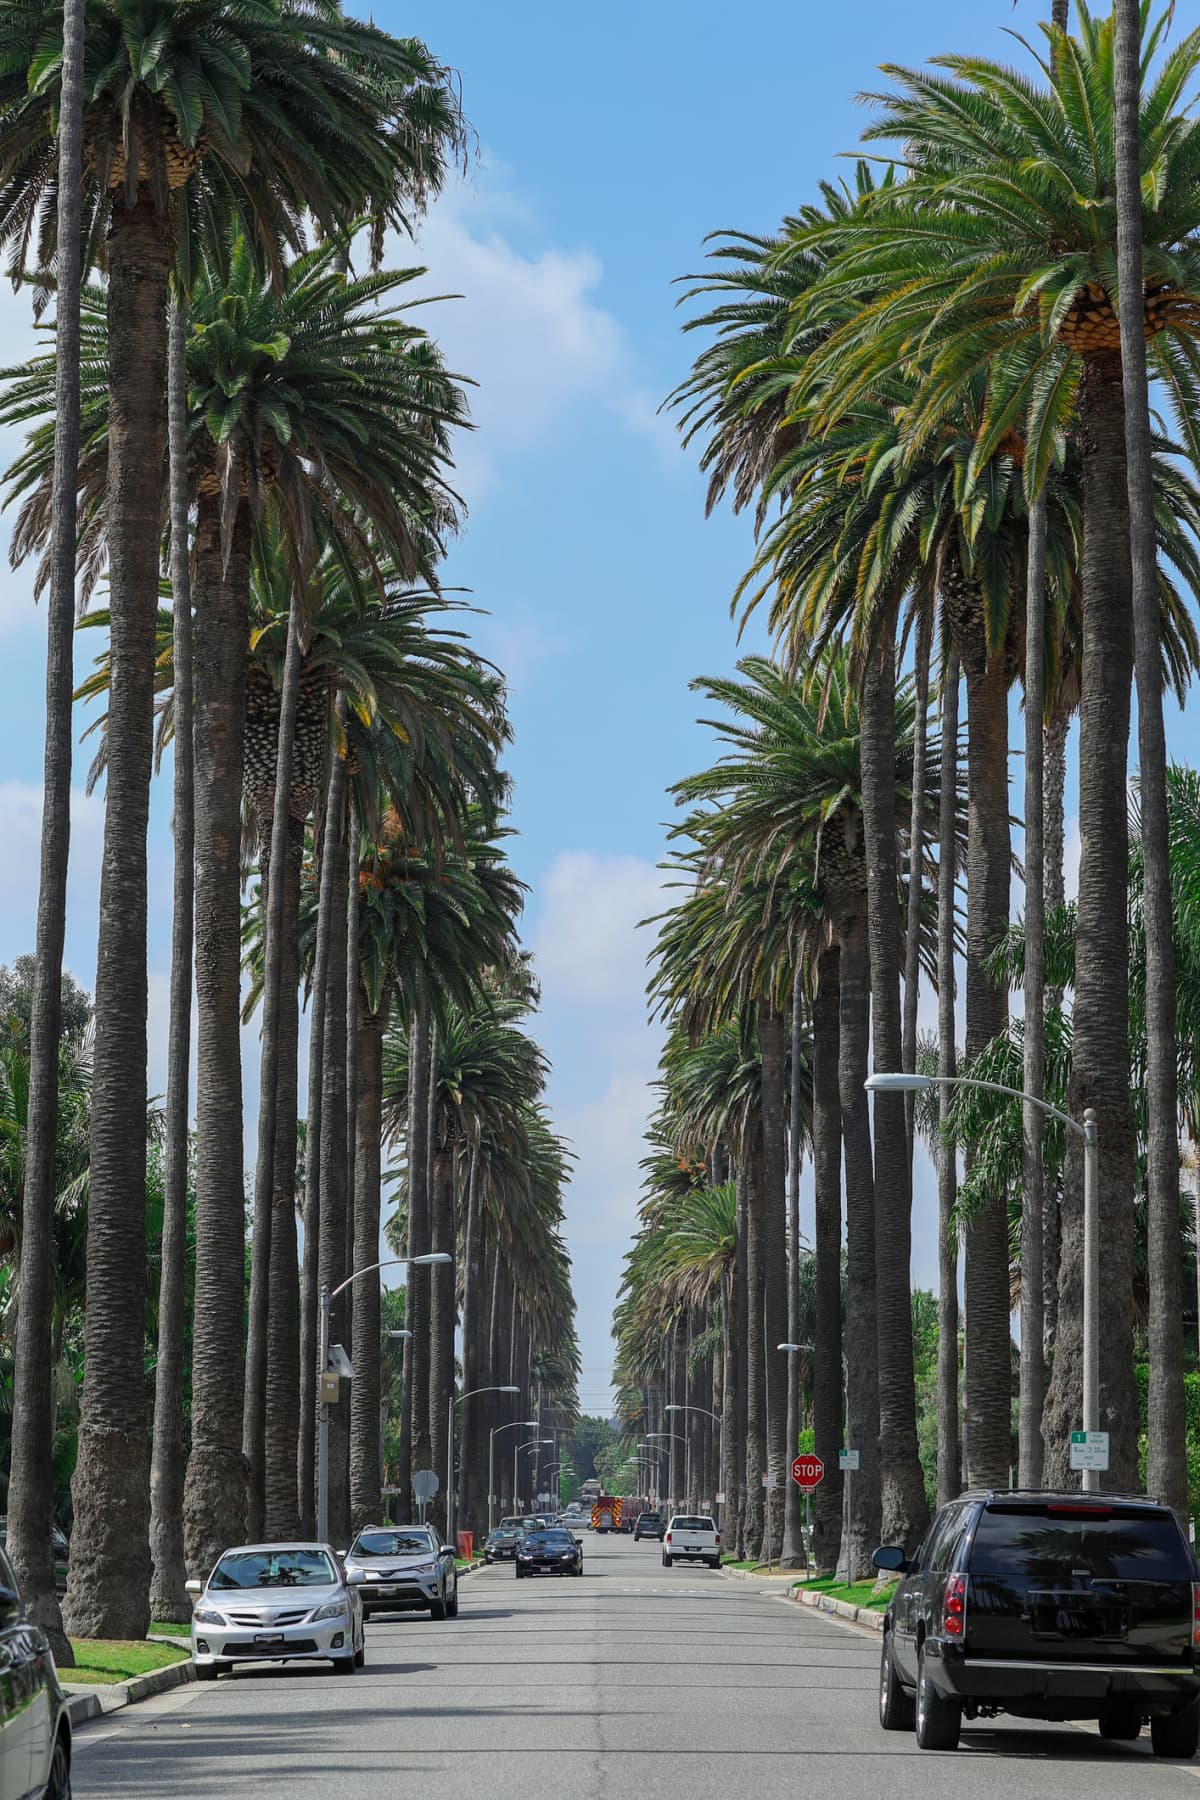 A photo of one fancy street in Los Angeles, taken on May 13th 2018